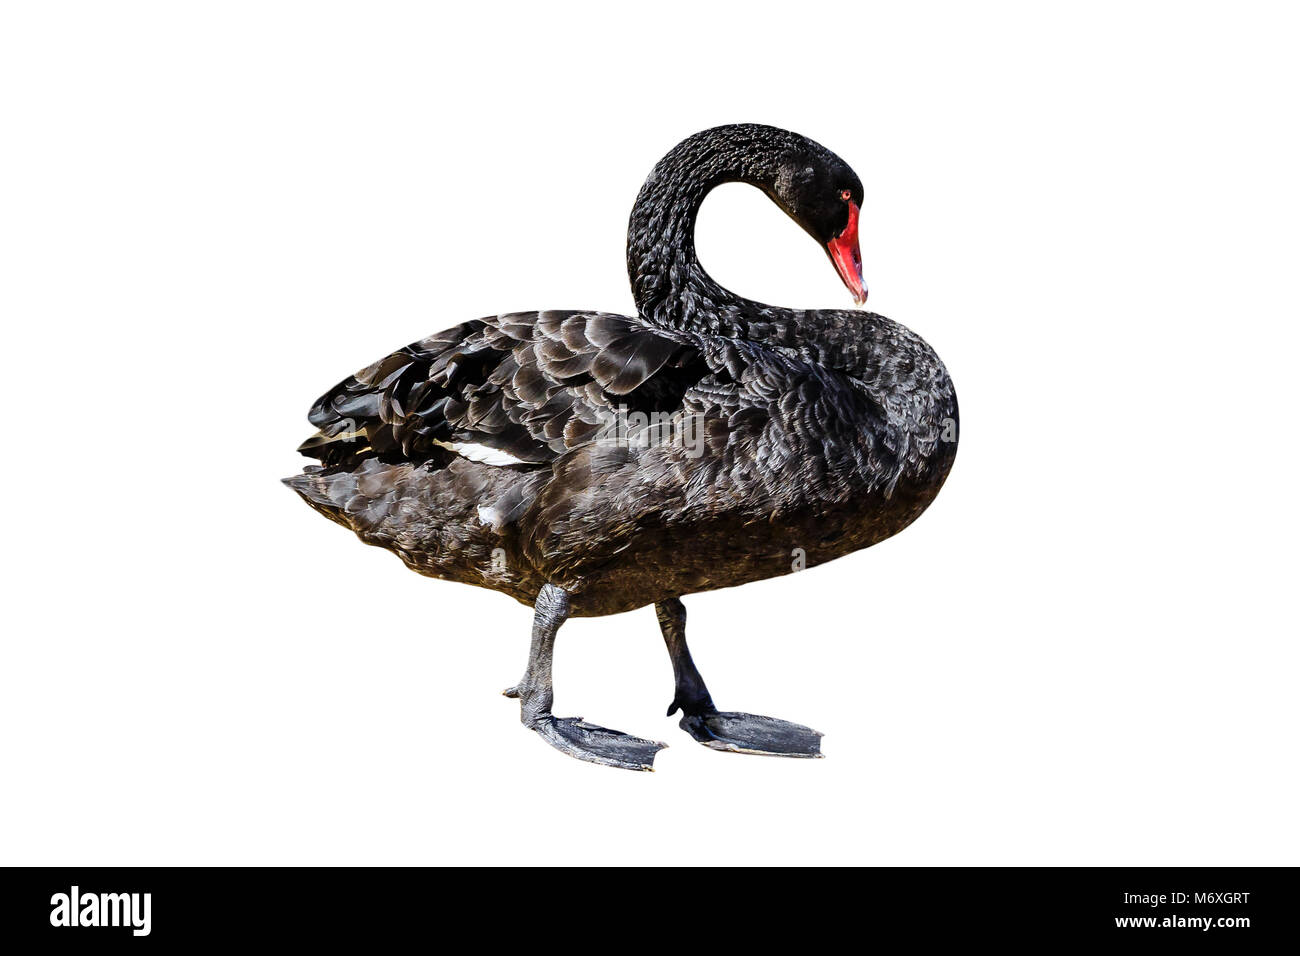 A side view of Black Swan or Cygnus Atratus, isolated on white background. The Black Swan is located on Perth's Swan river shore in Western Australia. Stock Photo